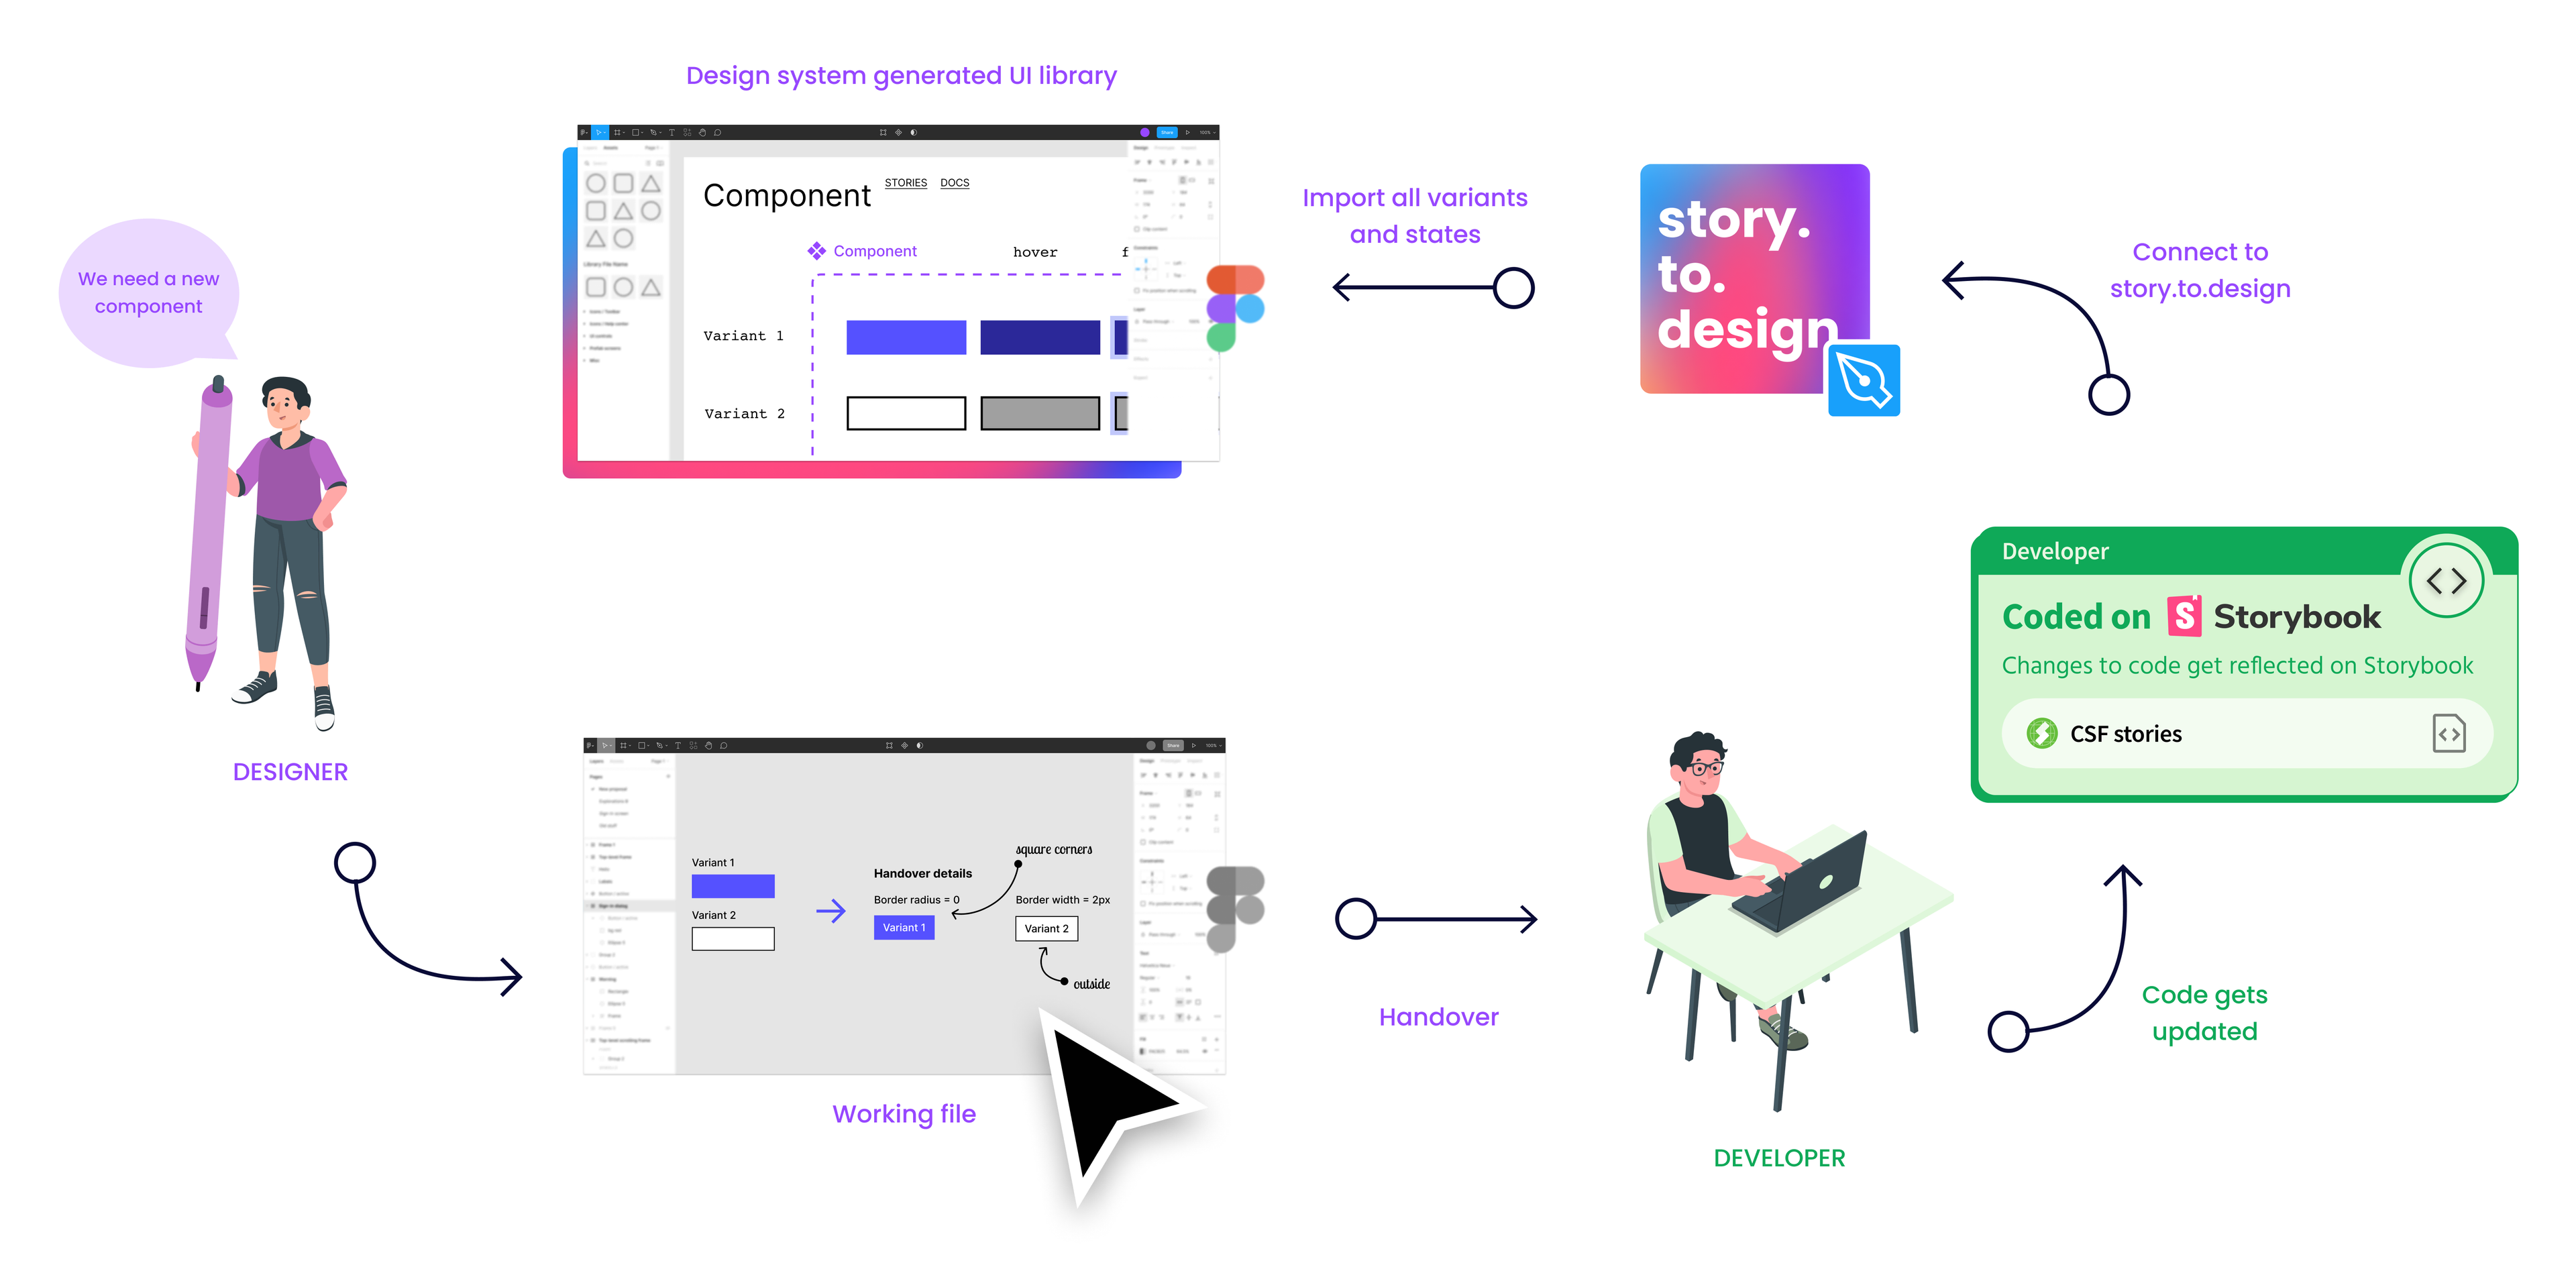 Full design and development workflow using story.to.design